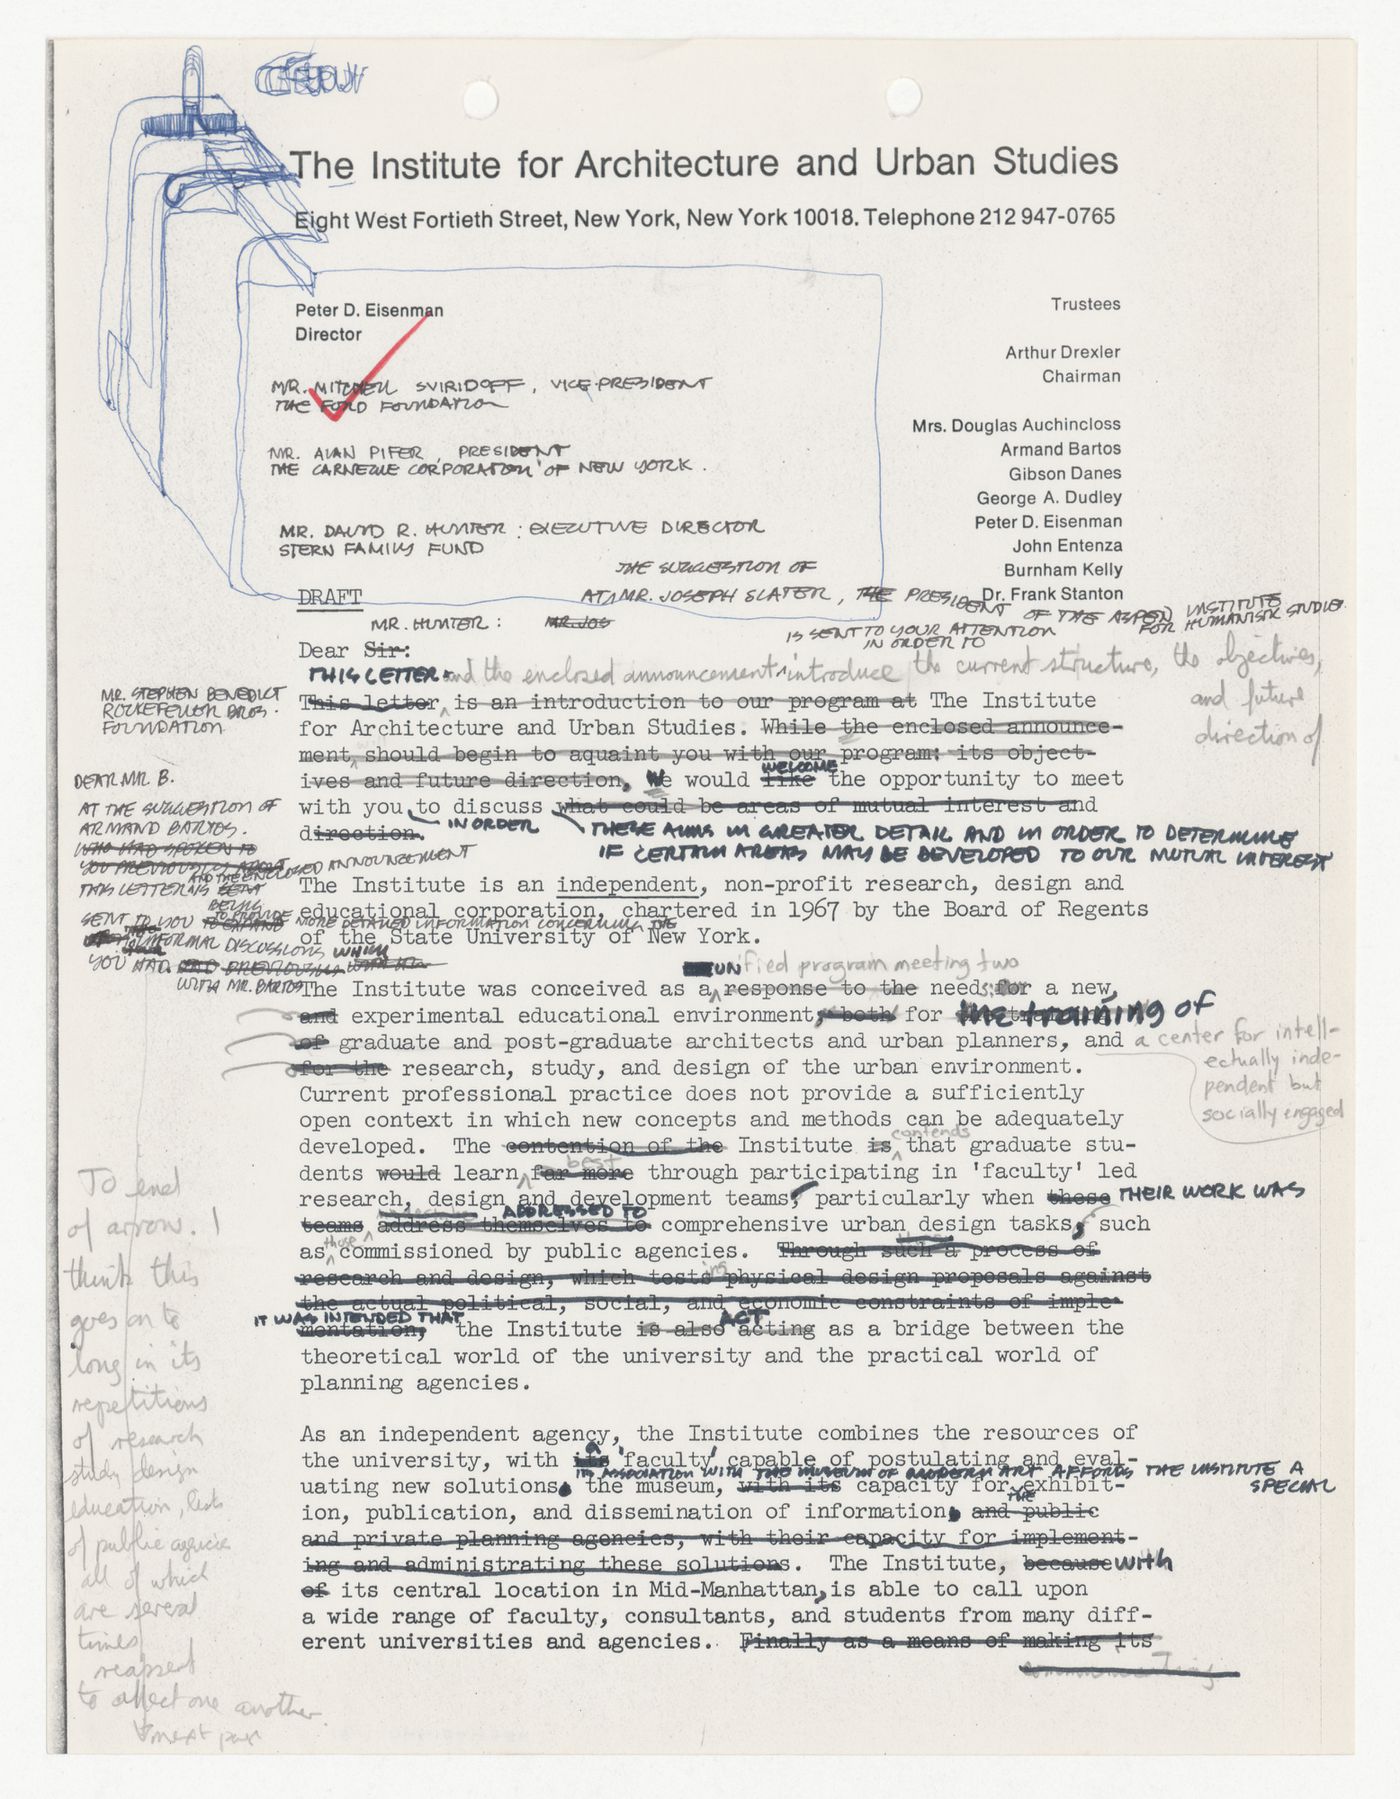 Draft letter for requesting donations including a brief overview of IAUS history and projects written by Peter D. Eisenman with annotations and corrections